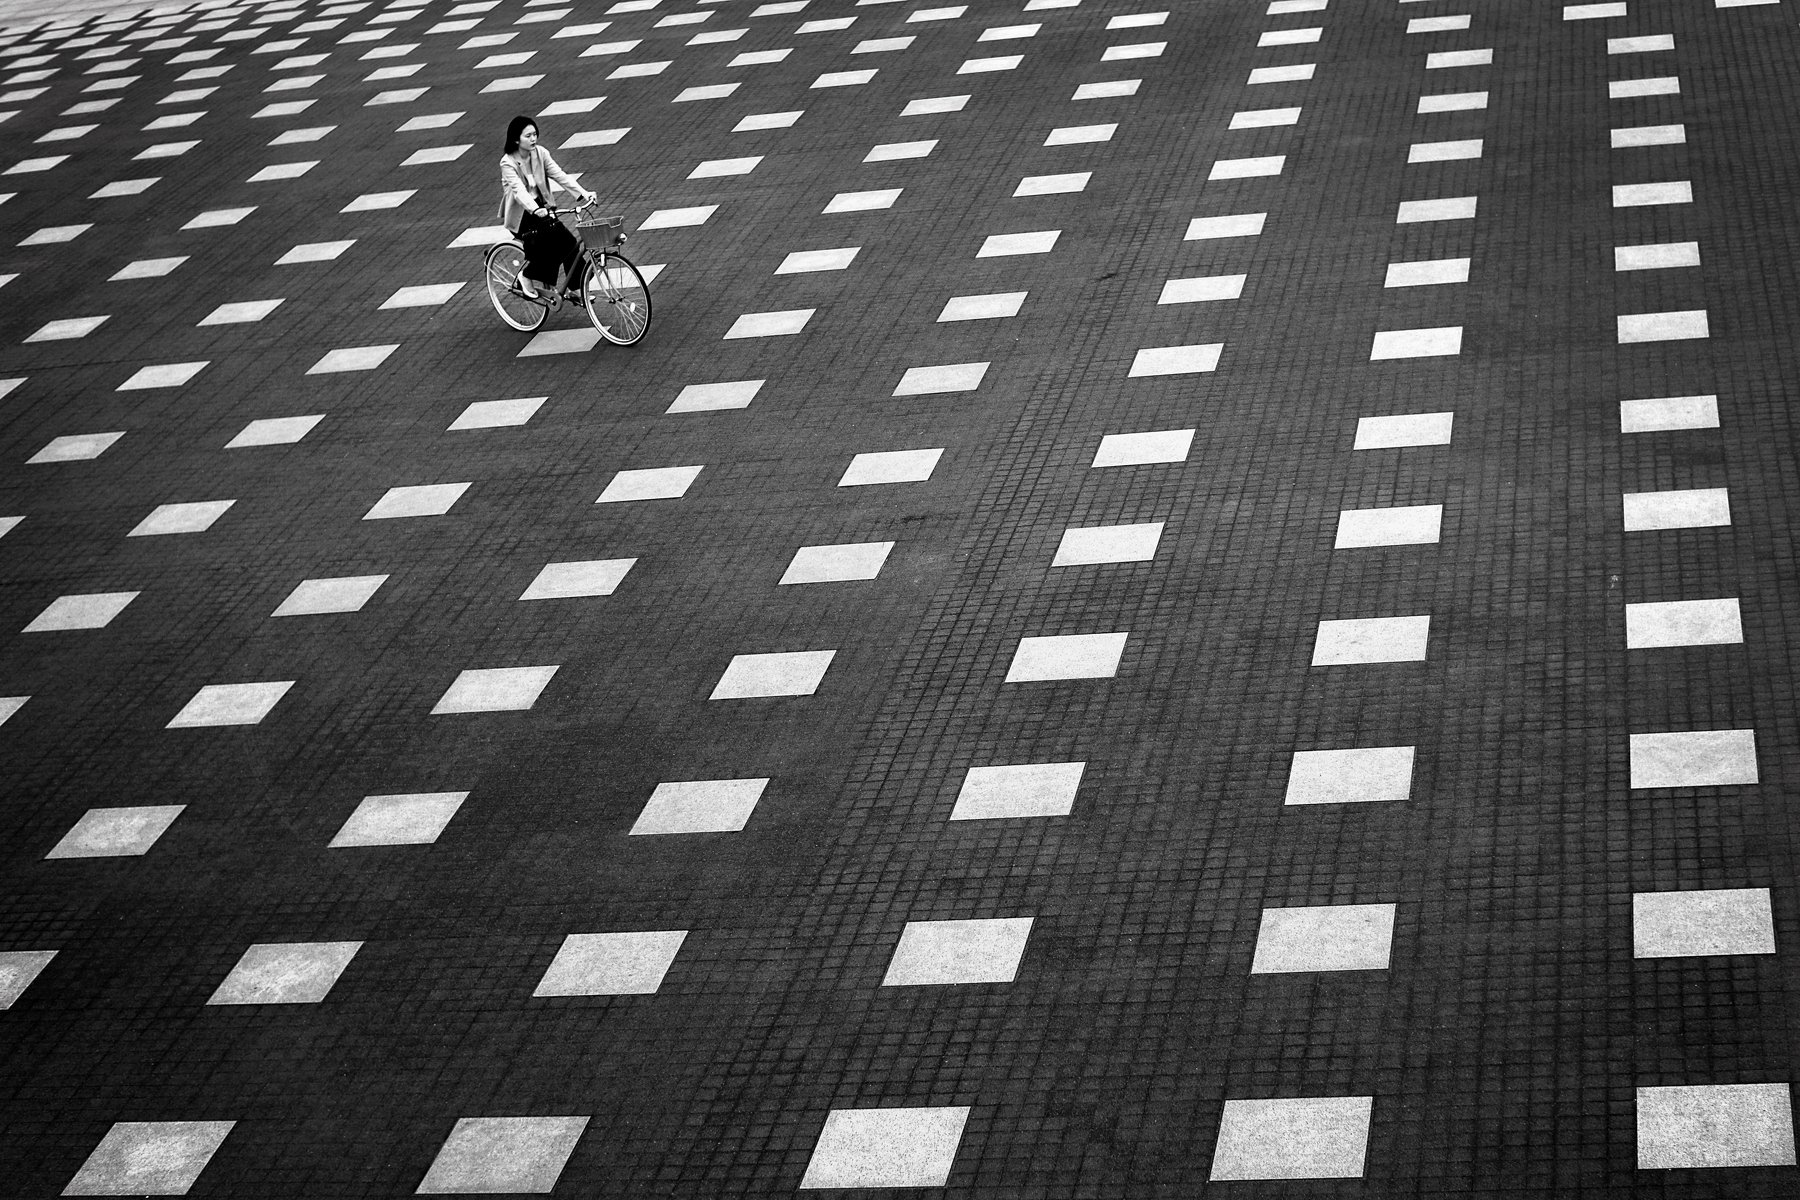 yancho sabev photography, monochrome, outdoor, Japan, high angle view, pattern, square, bicycle, black and white, one person, Yancho Sabev